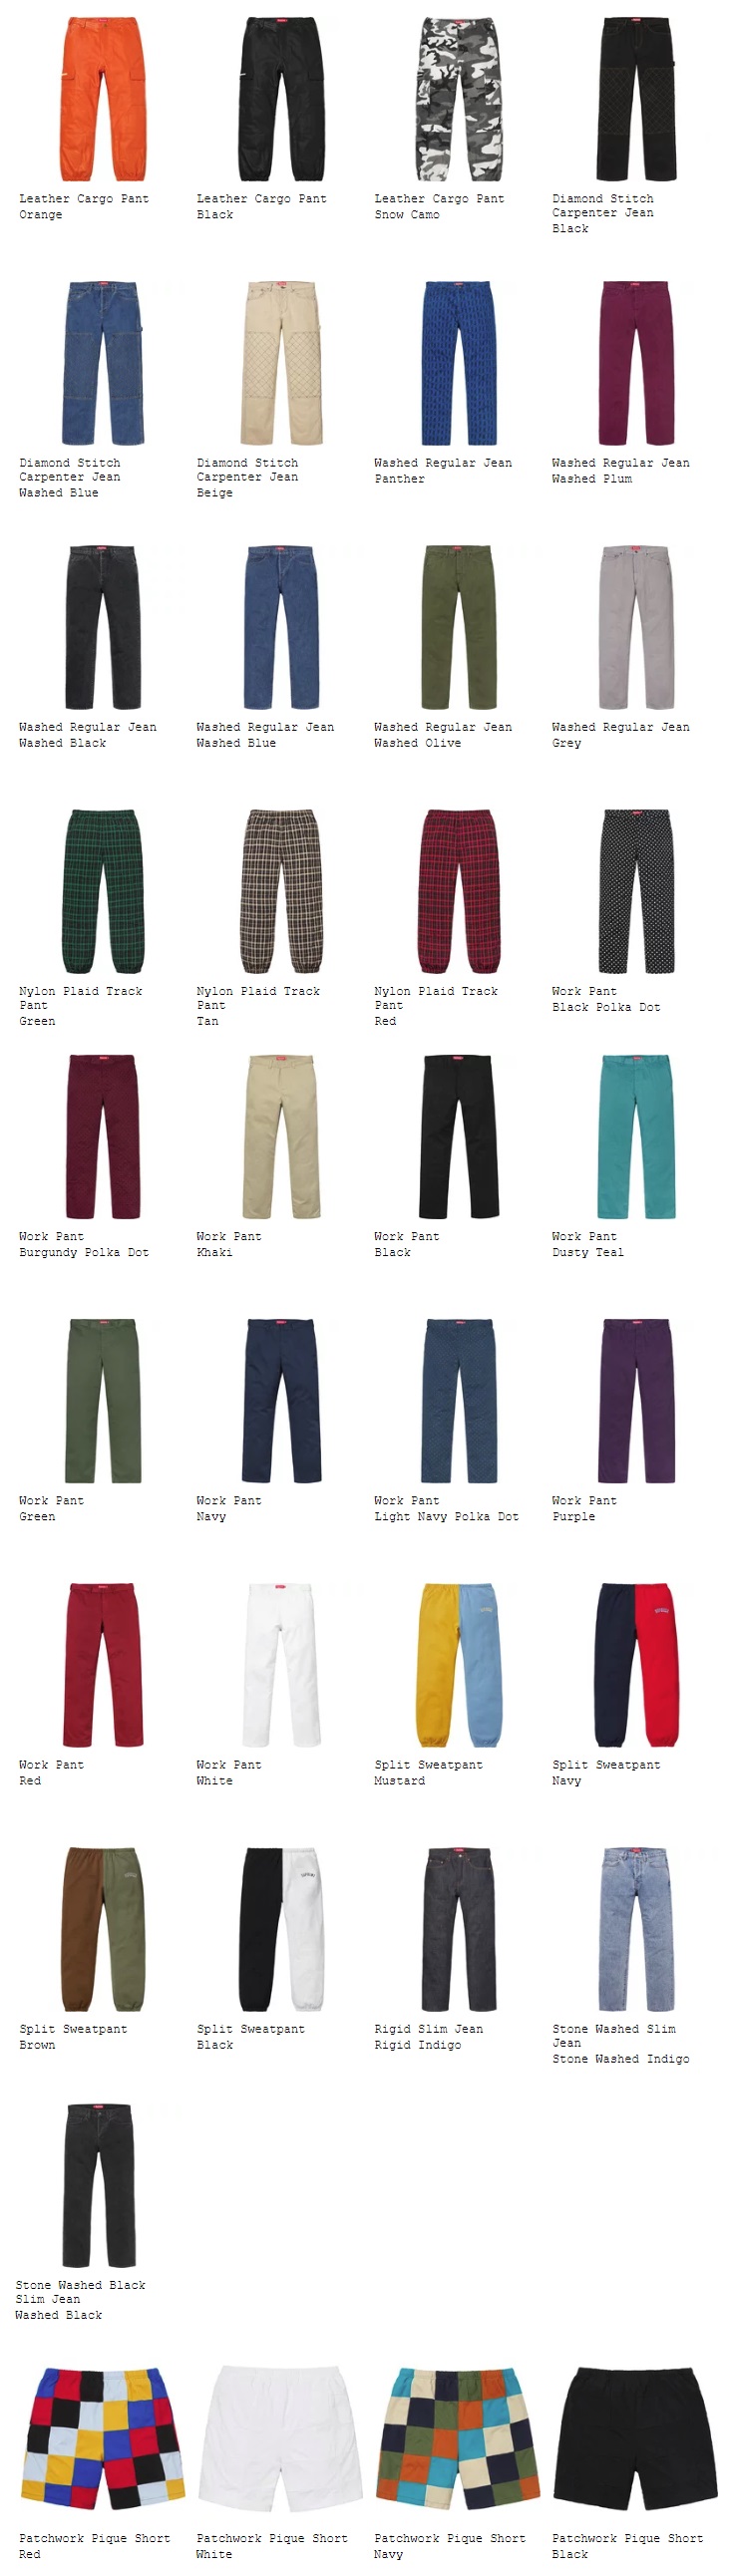 supreme-18aw-launch-20180818-week1-release-items-pant